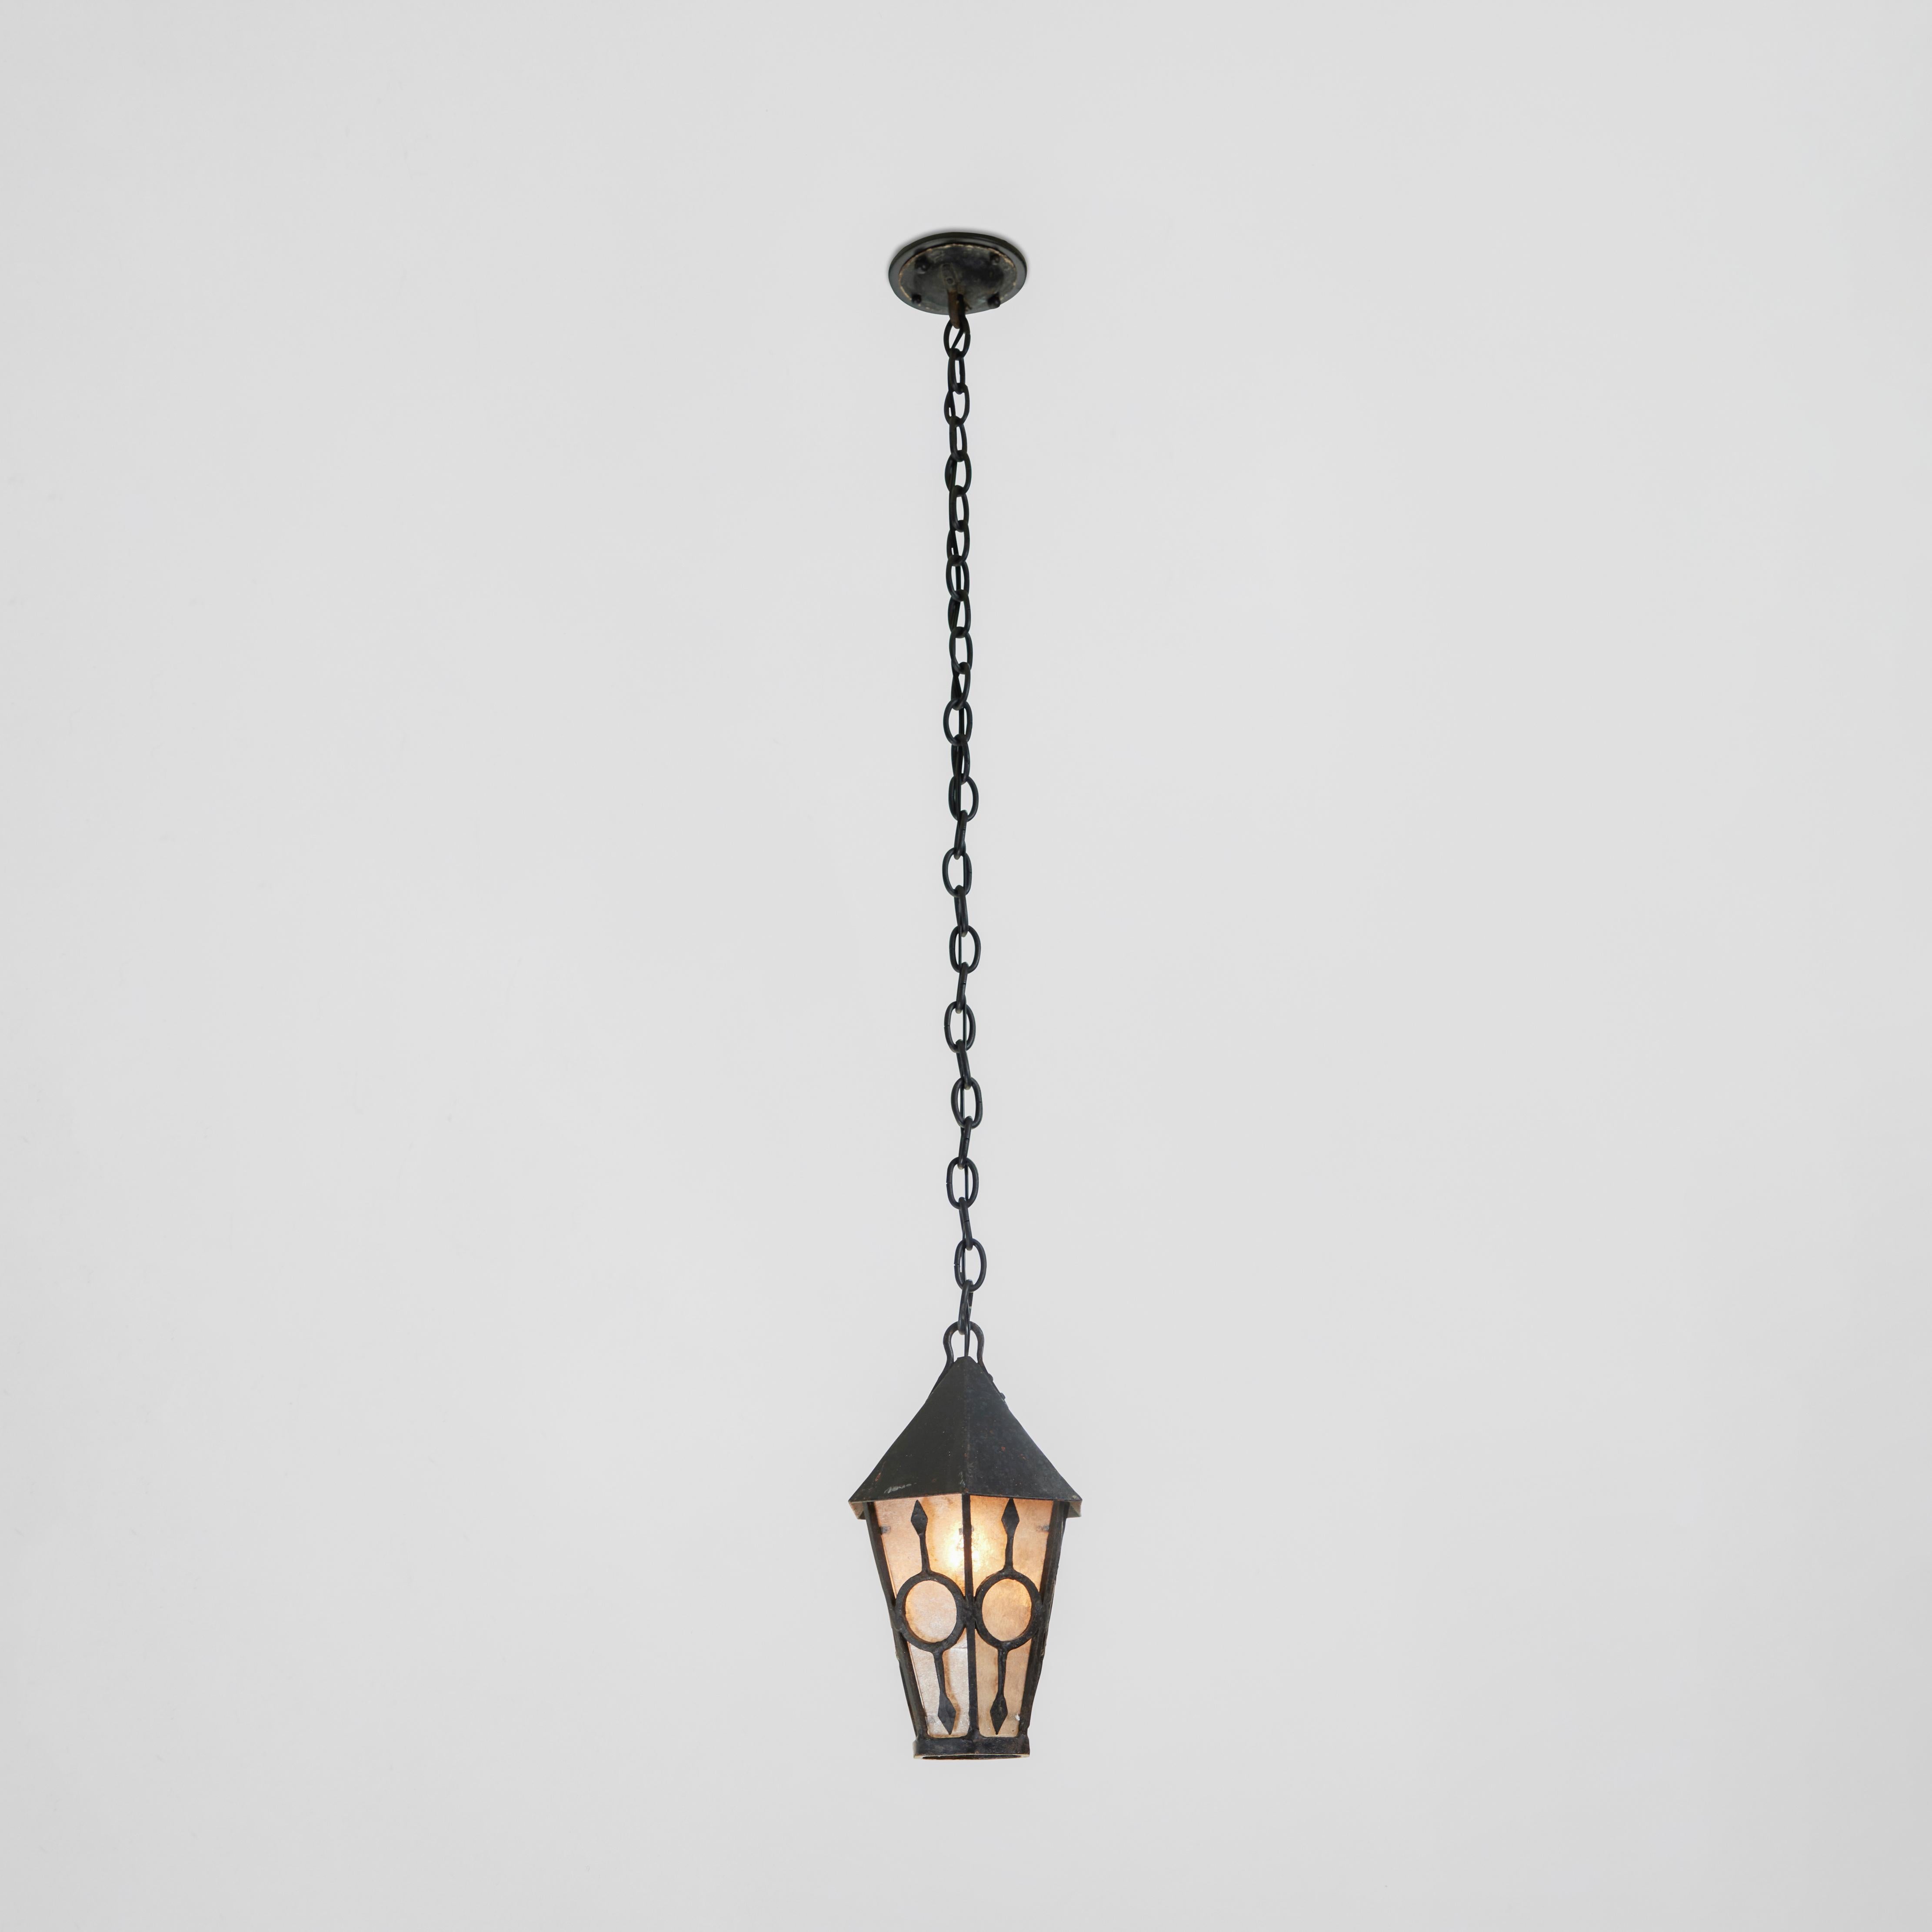 This small antique black iron hanging lantern has a large presence. Newly rewired, it has new mica inserts. A perfect accent in that special space!